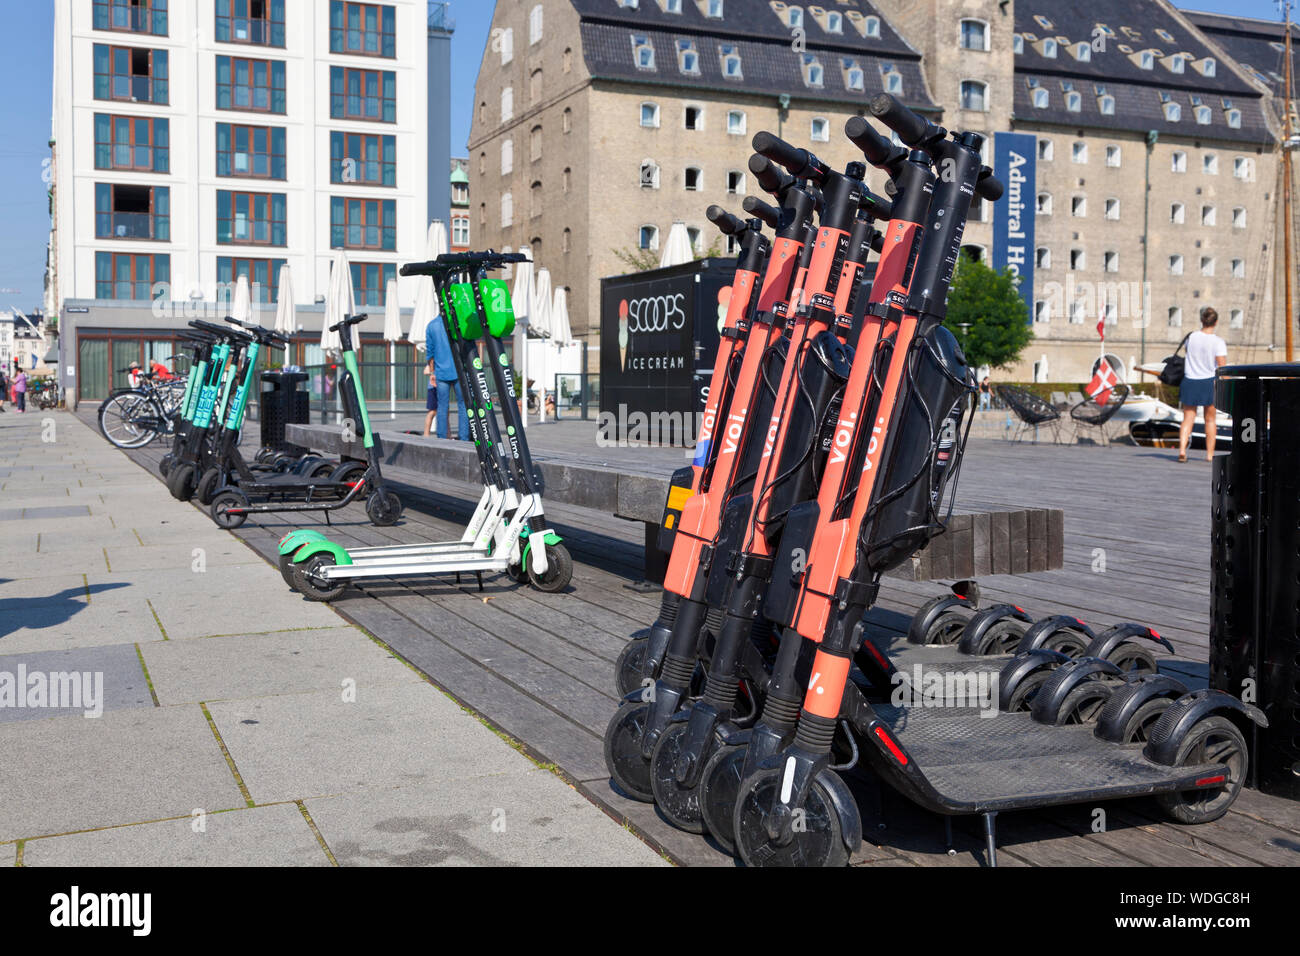 VOI, LIME and TIER rental e-scooters parked for hire at Larsens Plads in Copenhagen inner harbour. Stock Photo